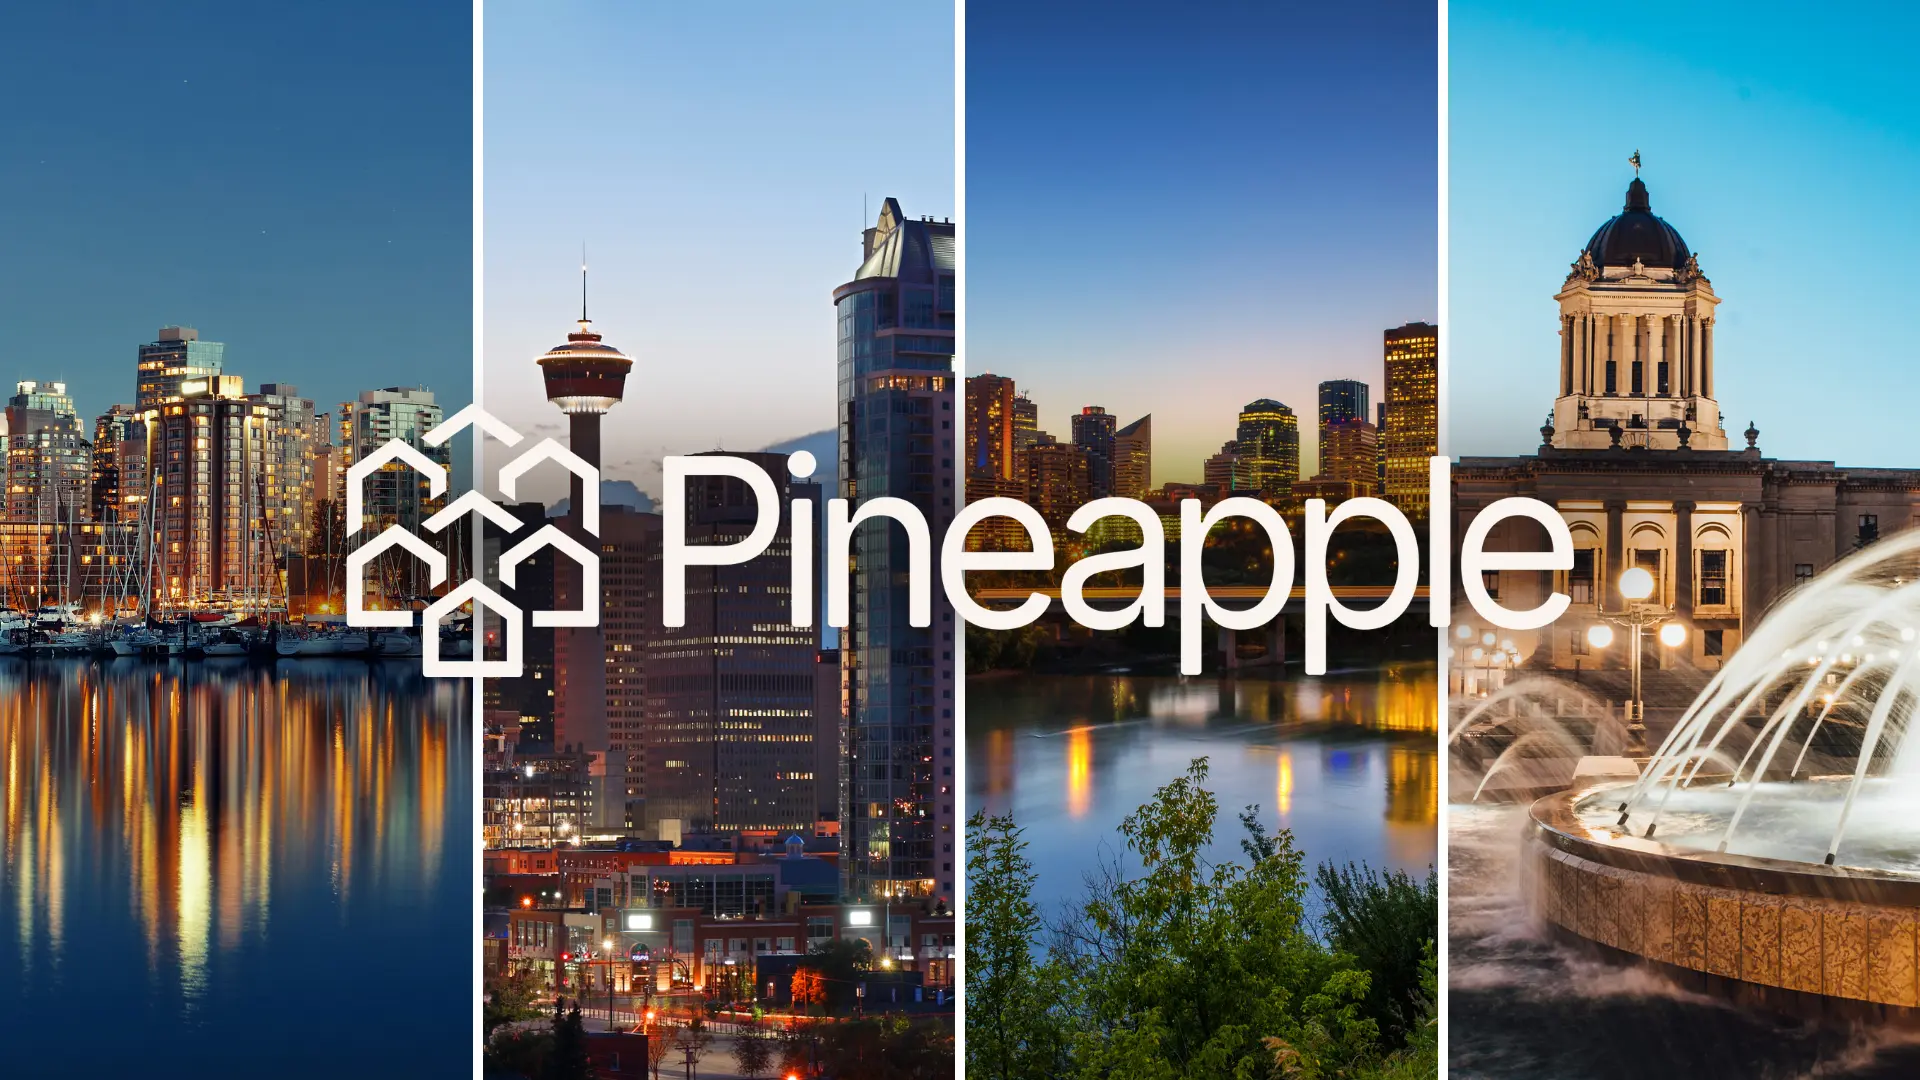 Pineapple Financial Expands Into Western Canada with New Corporate Office in Metro Vancouver, British Columbia 